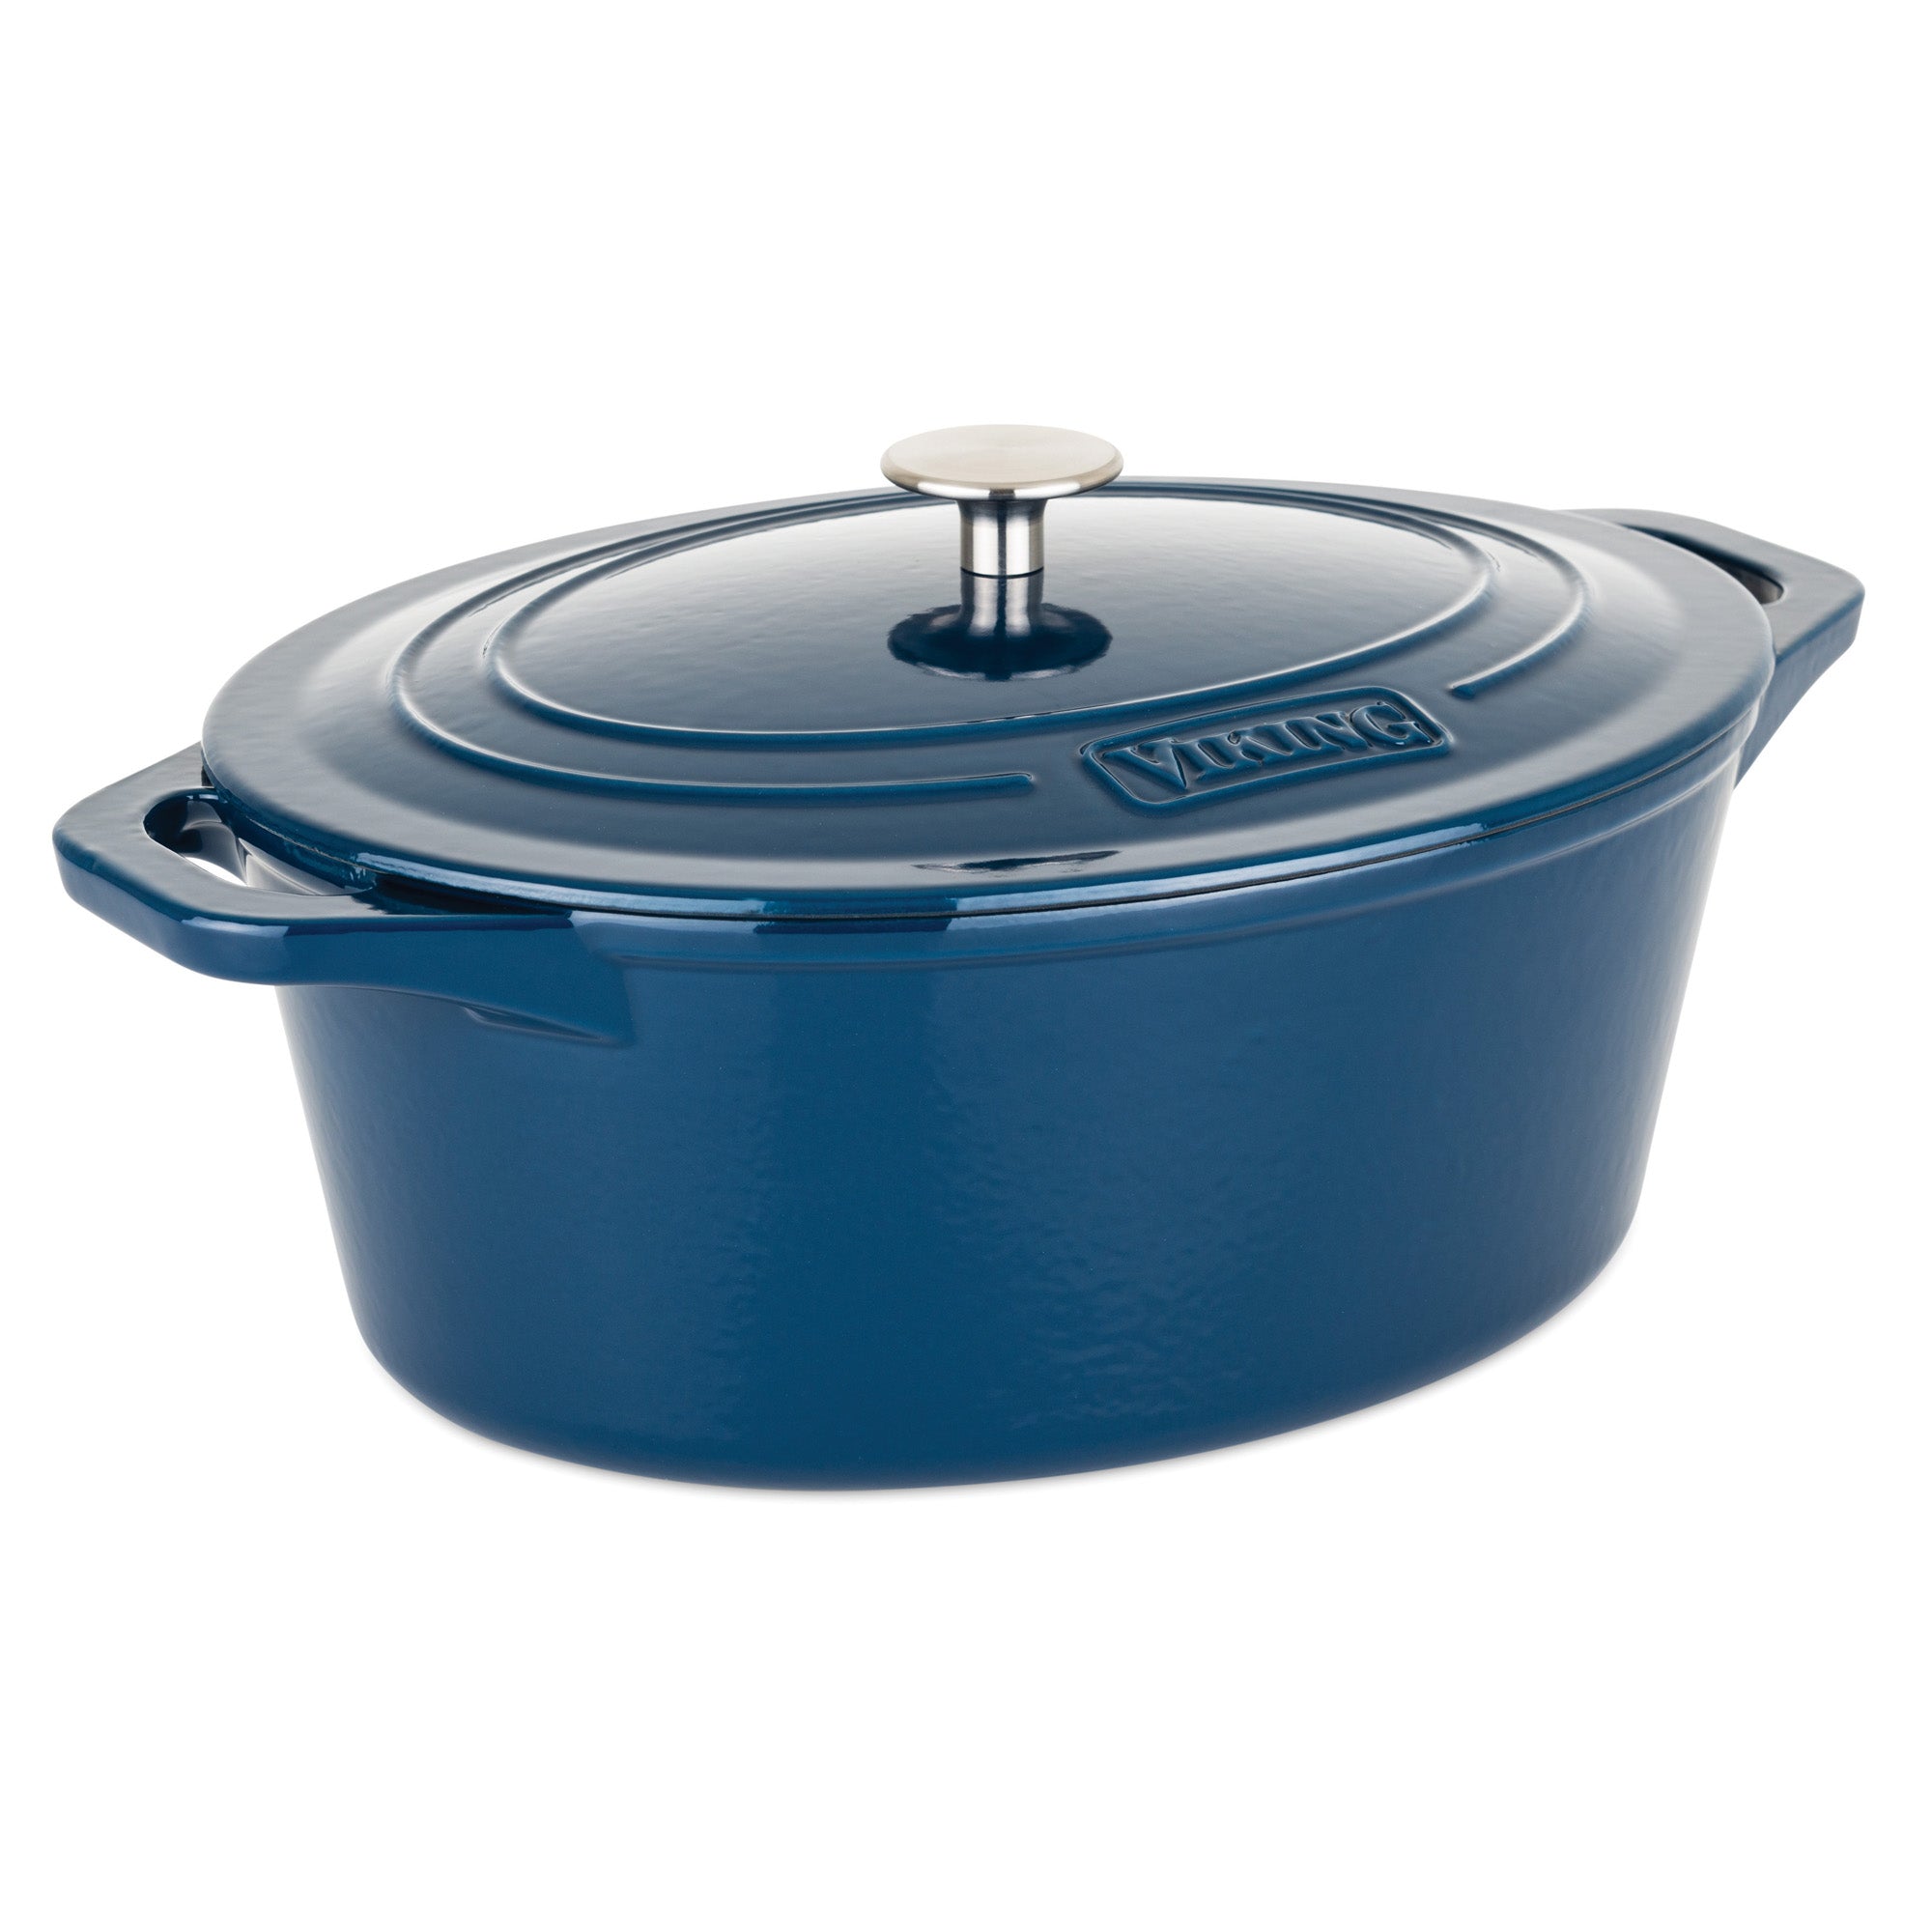 Enamel Coated Cast Iron Cookware, Free US Shipping